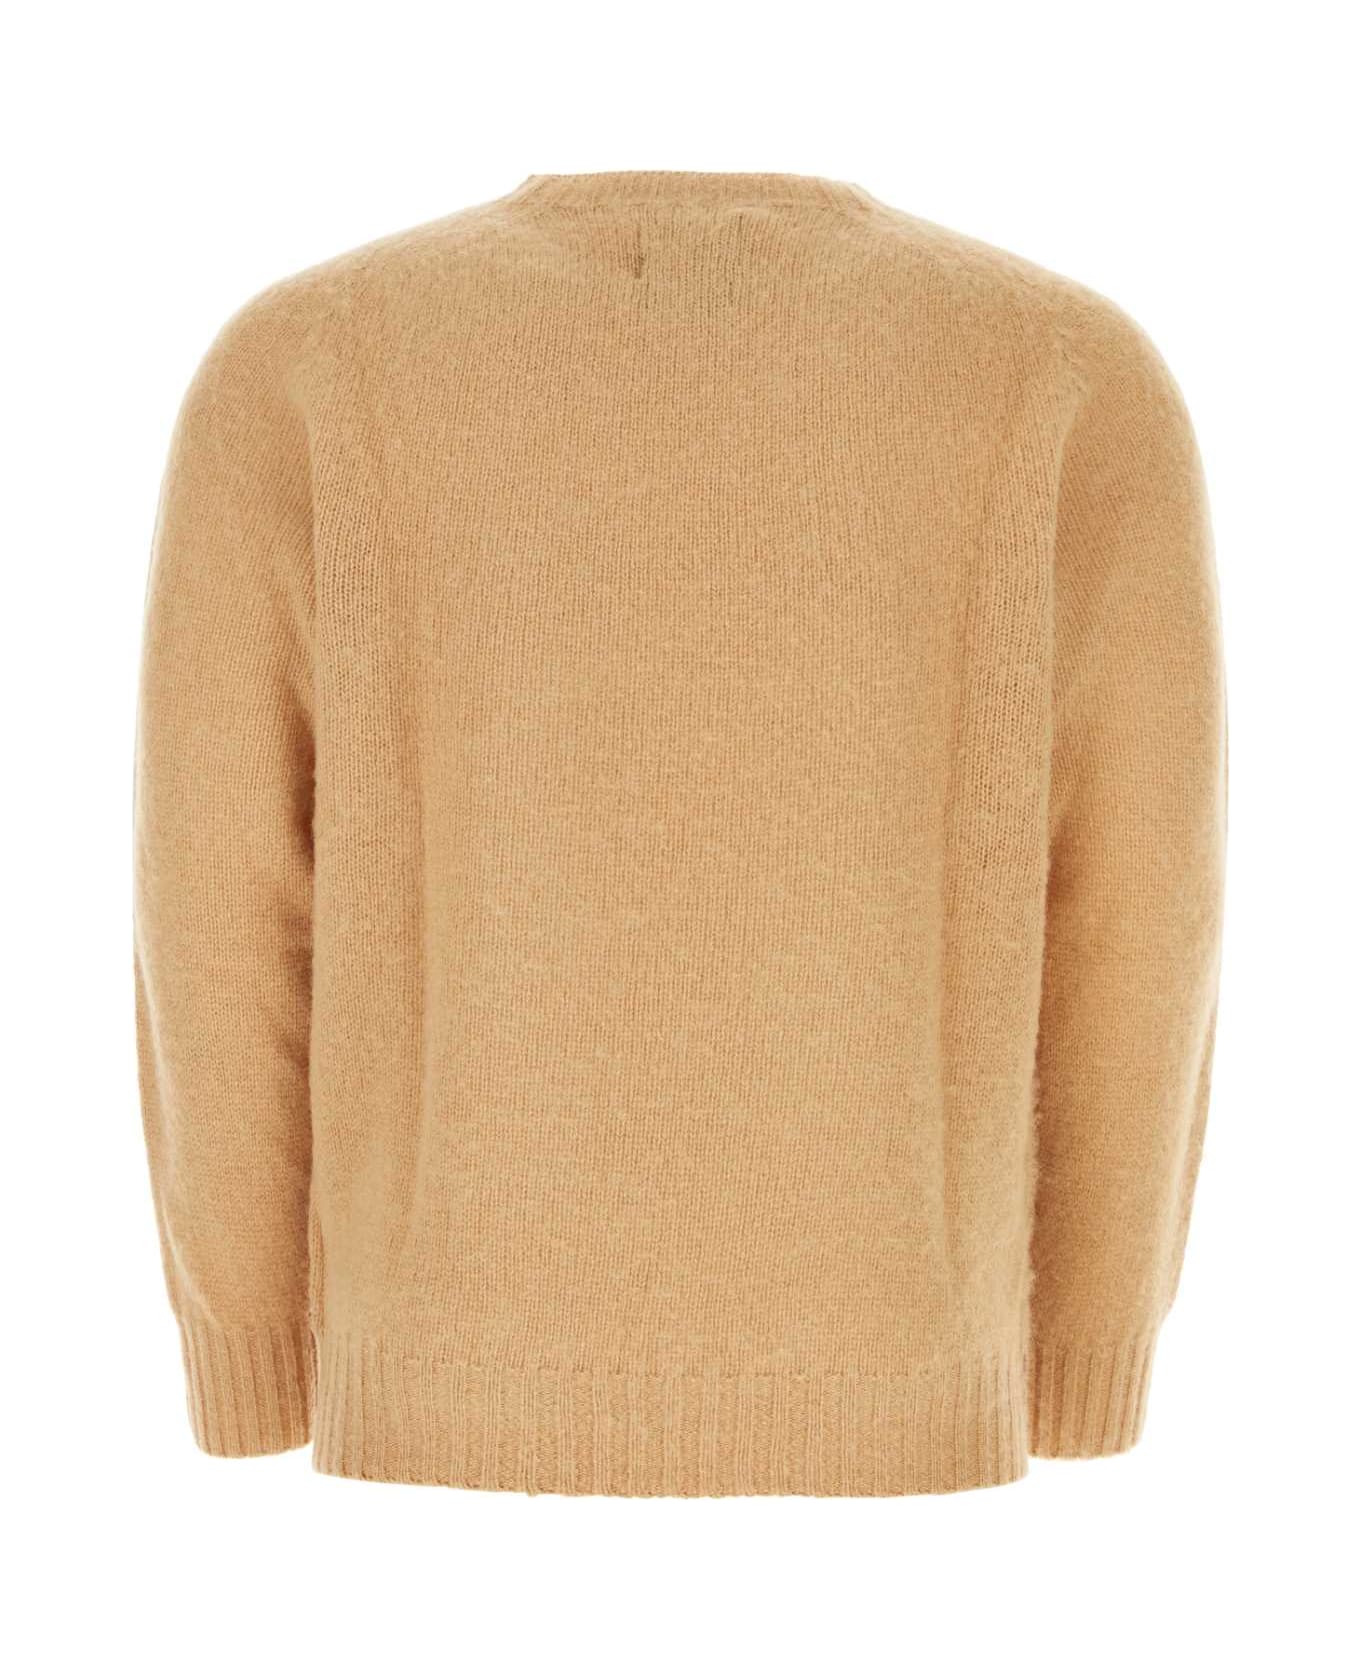 Howlin Biscuit Wool Sweater - CAMEL